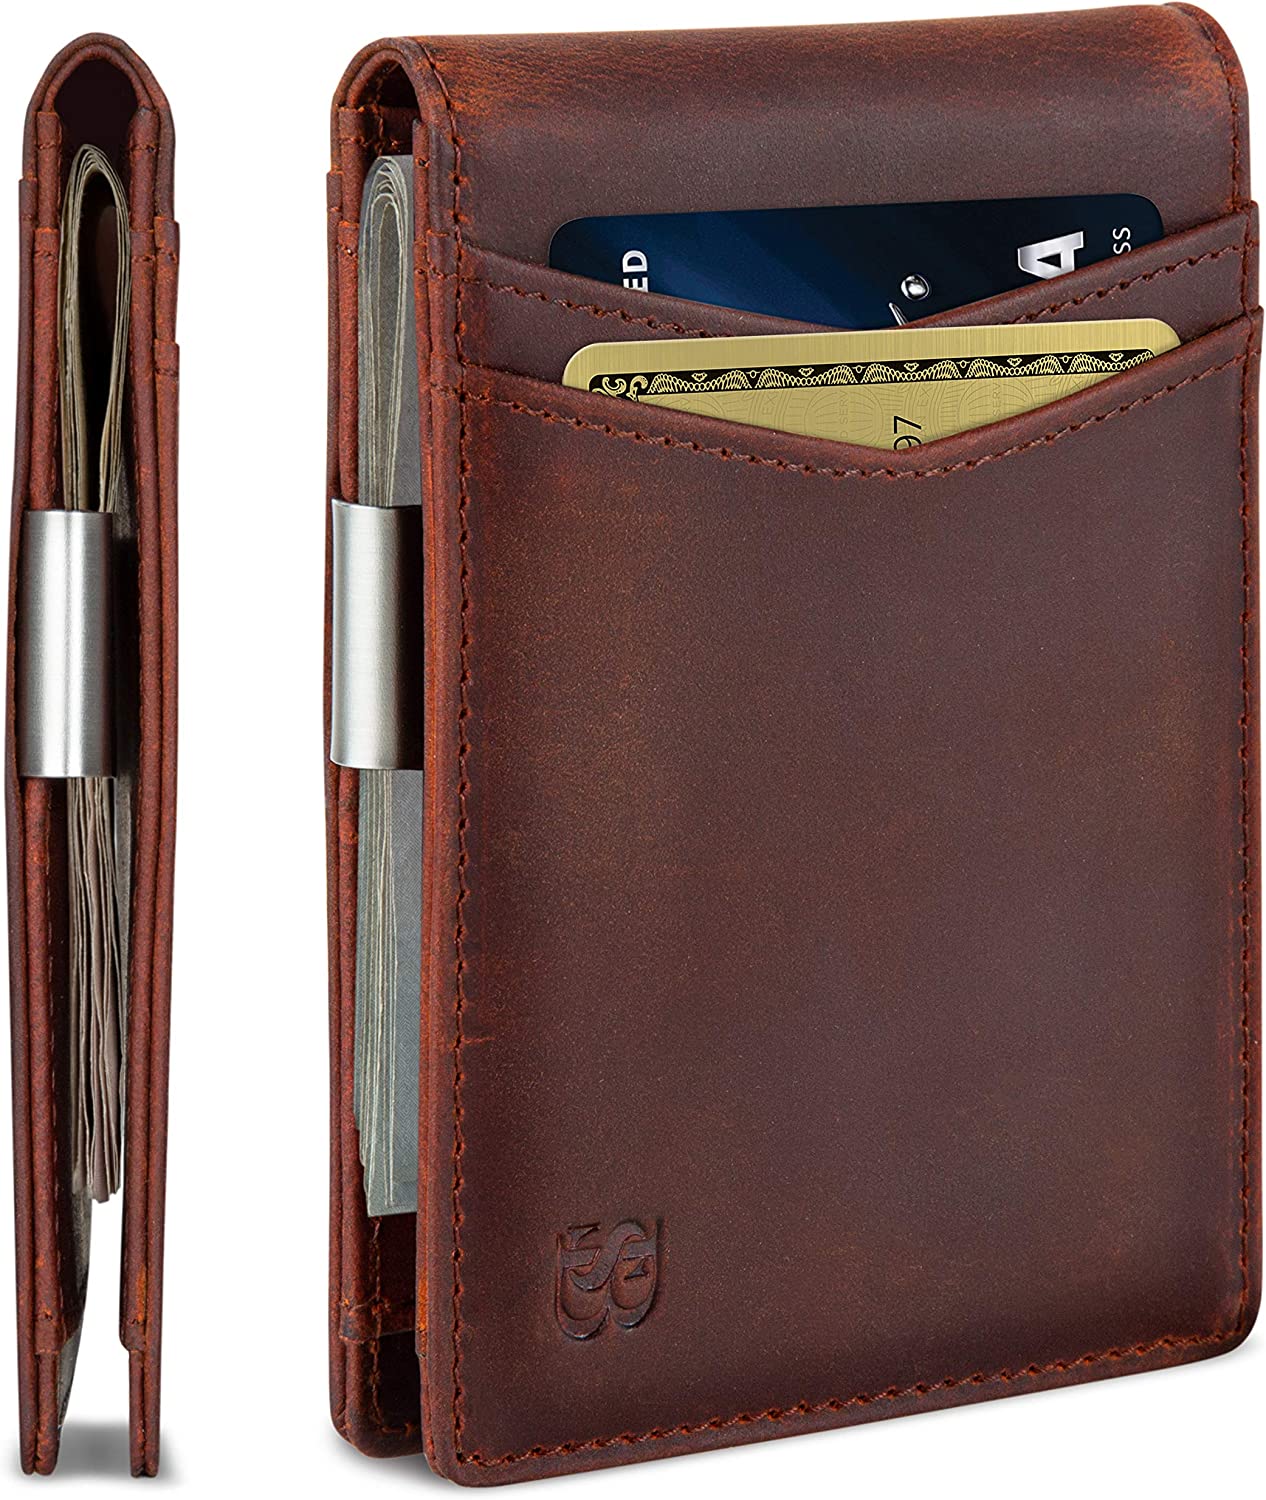 Customized Classic Leather Bifold Wallet for Men